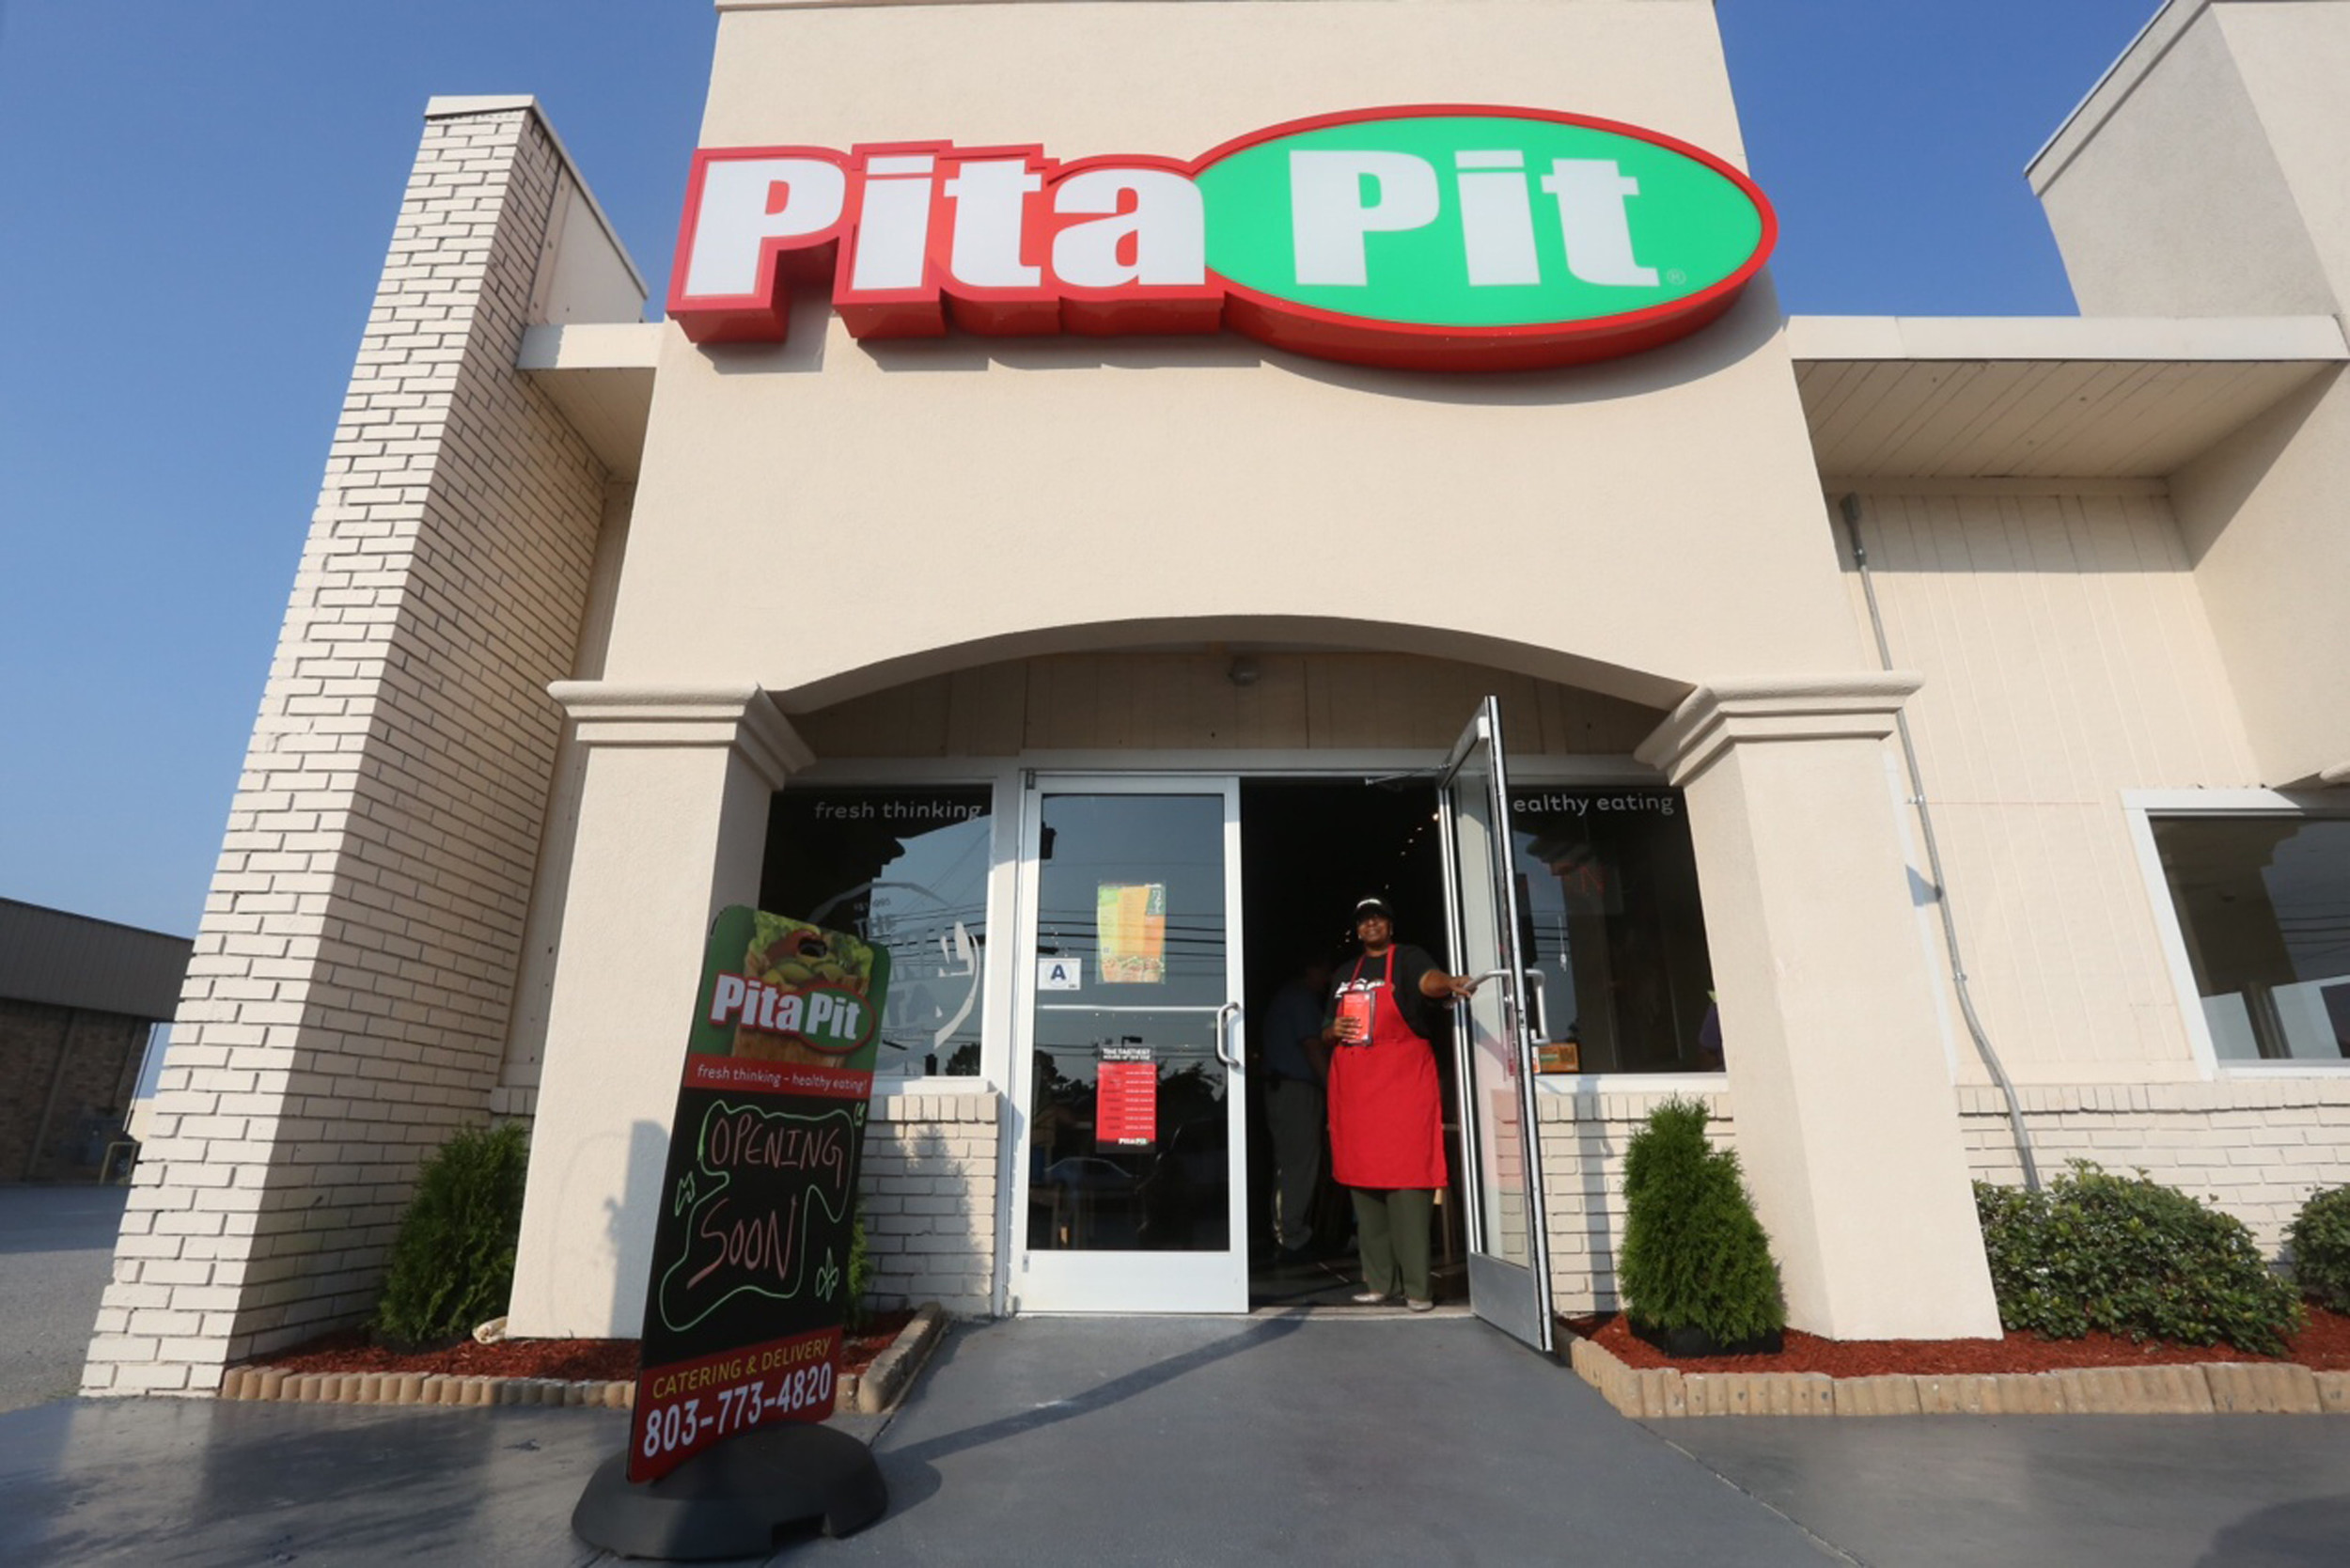 Pita Pit, 1029 Broad St., Suite B., is now open. The restaurant was supposed to open mid-June, but problems with construction set the opening back to Friday.